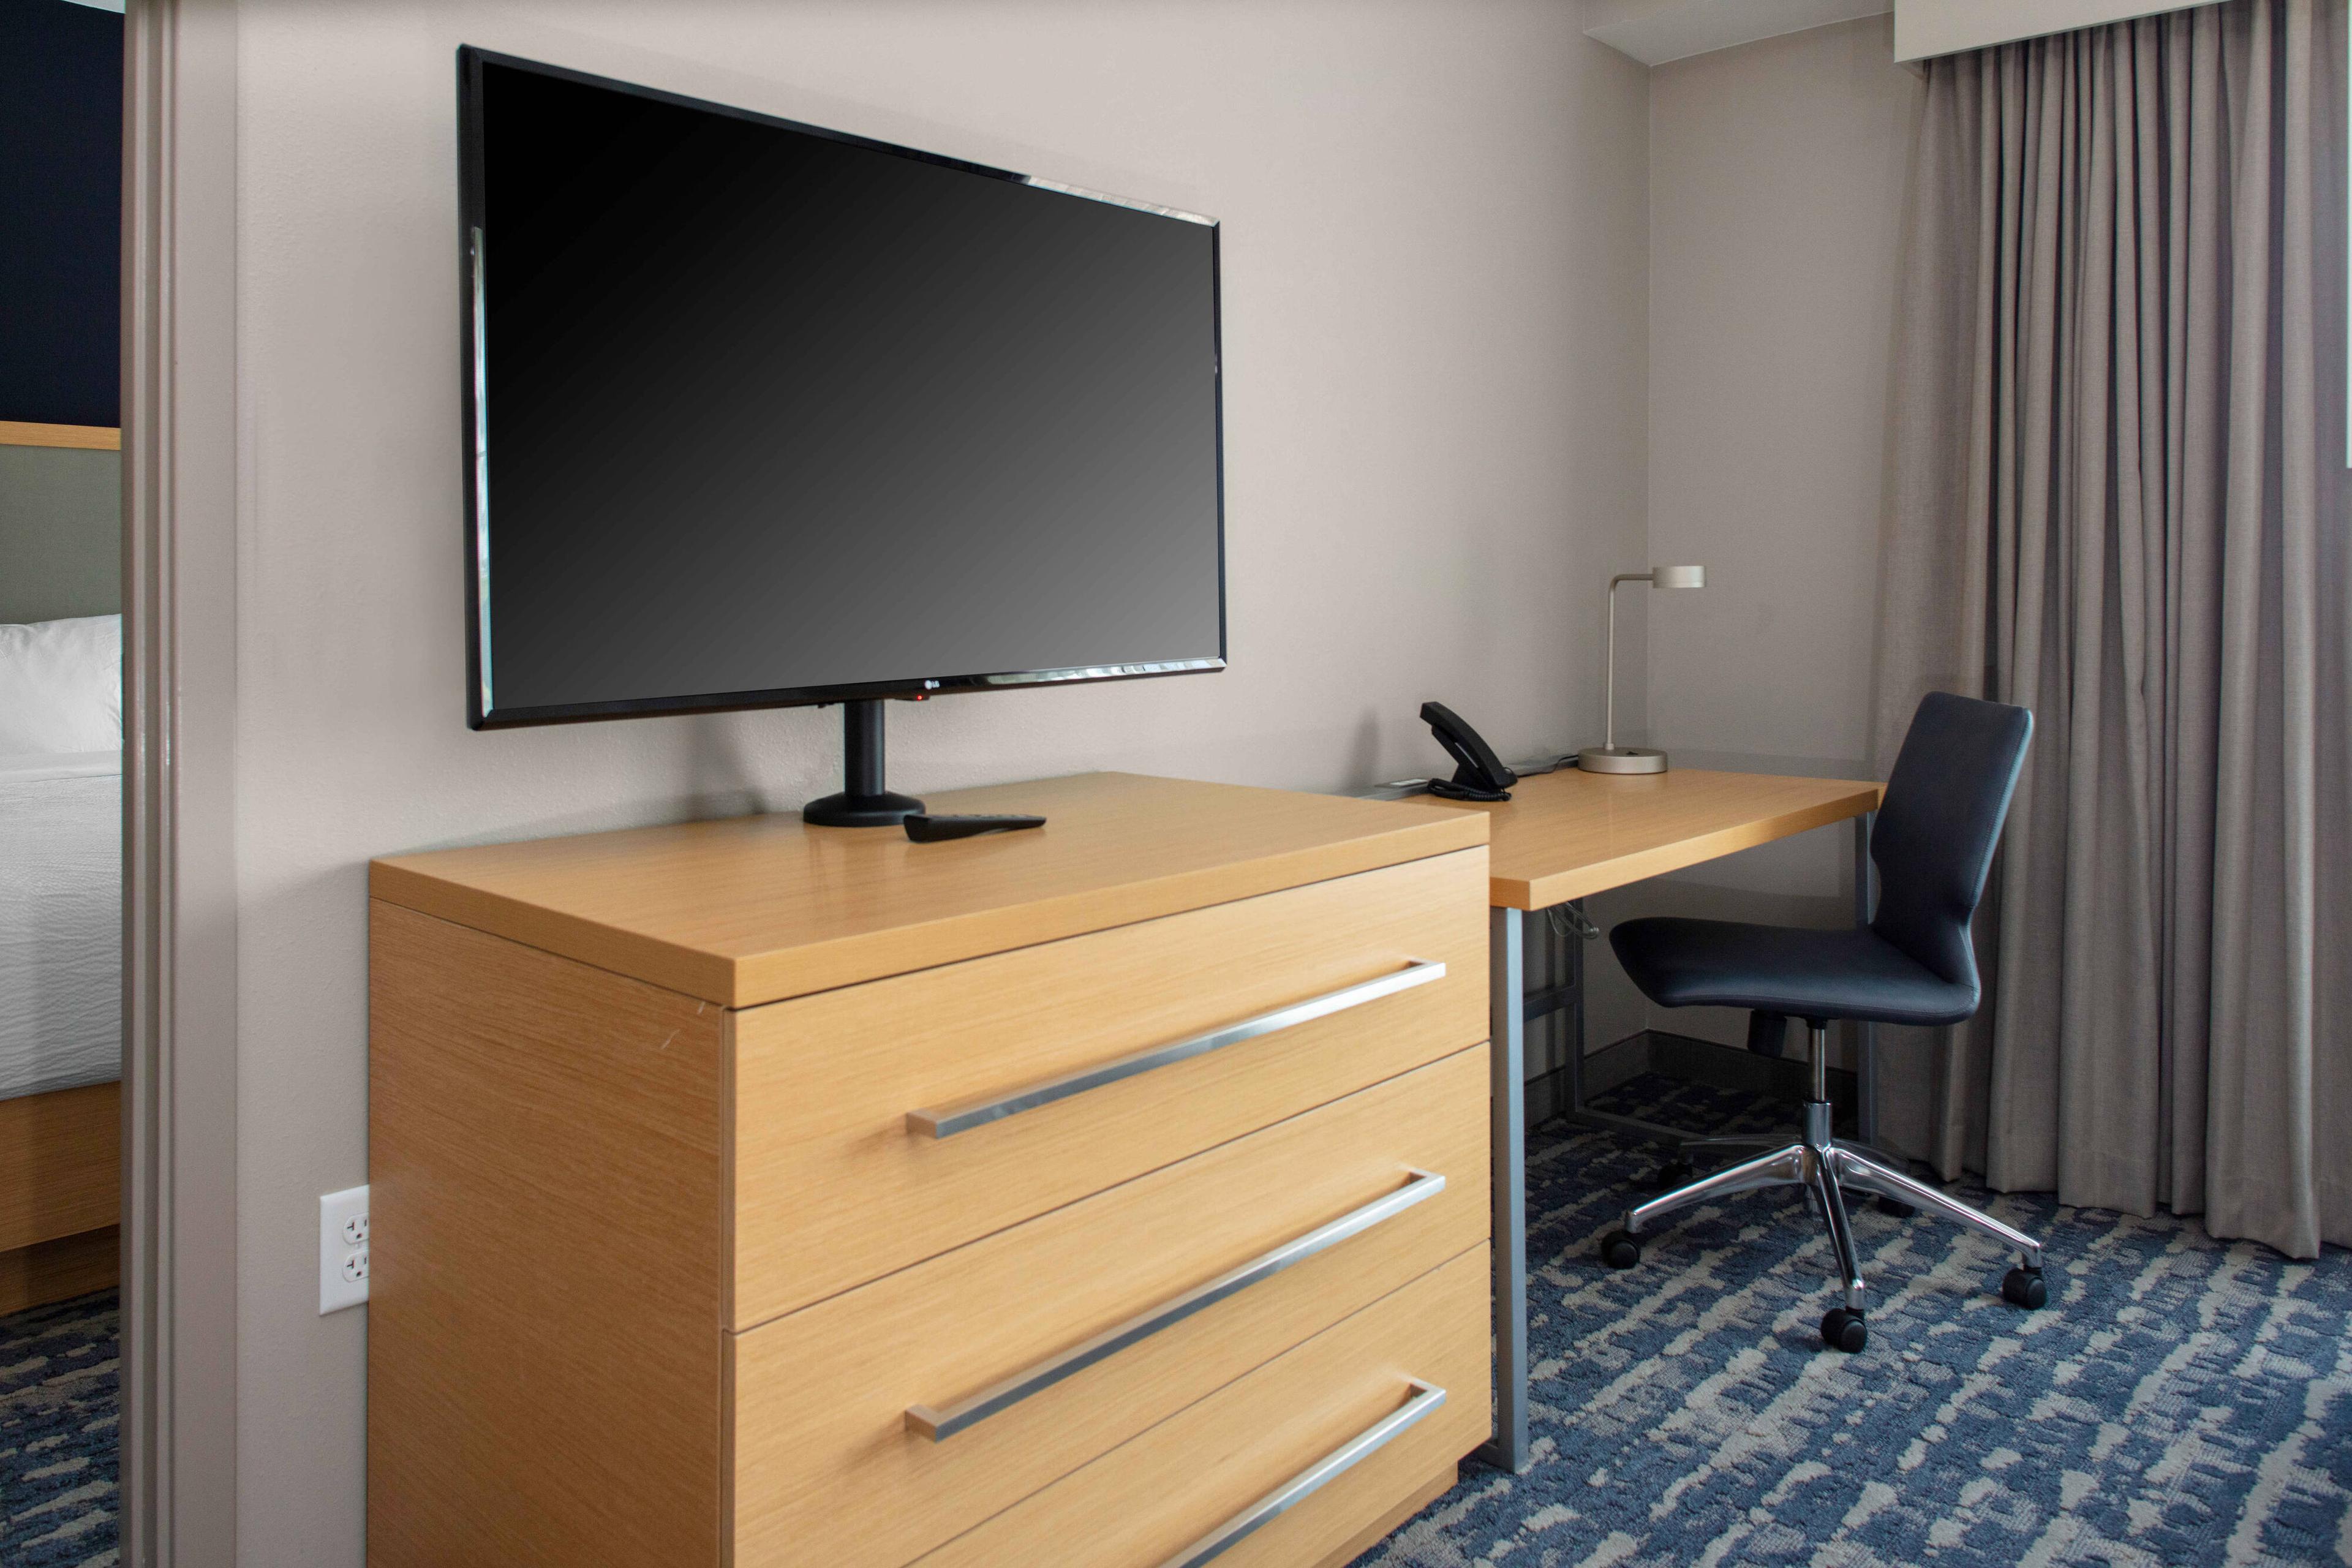 Our one bedroom suites offer complimentary WiFi and a comfortable work space.